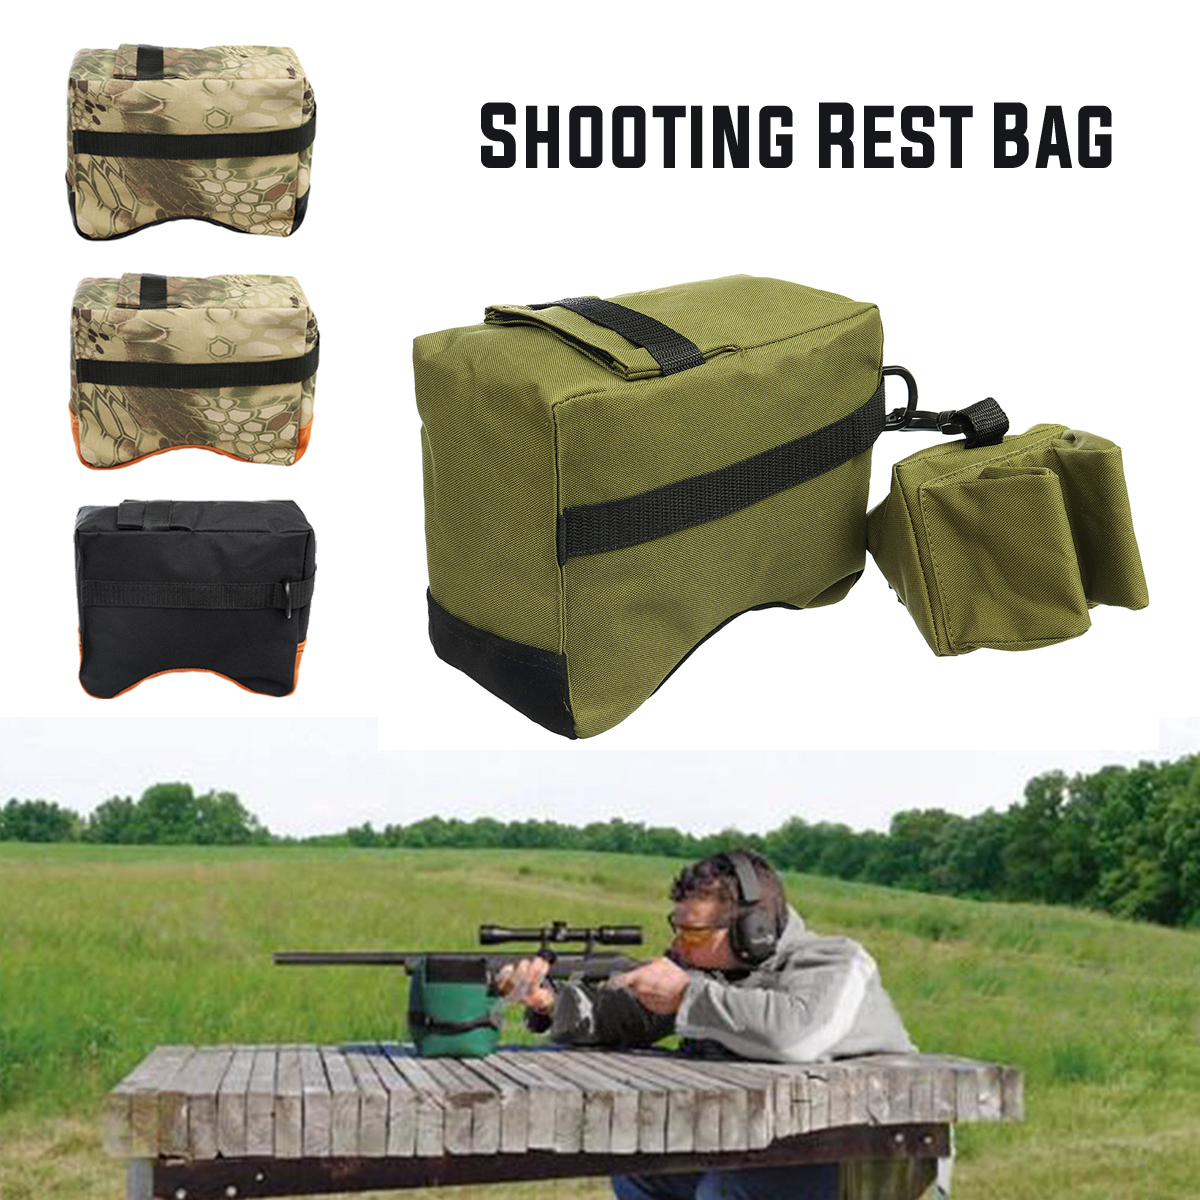 Front-Rear-Bag-Shooting-Sand-Bag-Gun-Photography-Bench-Rest-Stand-Holder-Hunting-Accessories-1339892-1